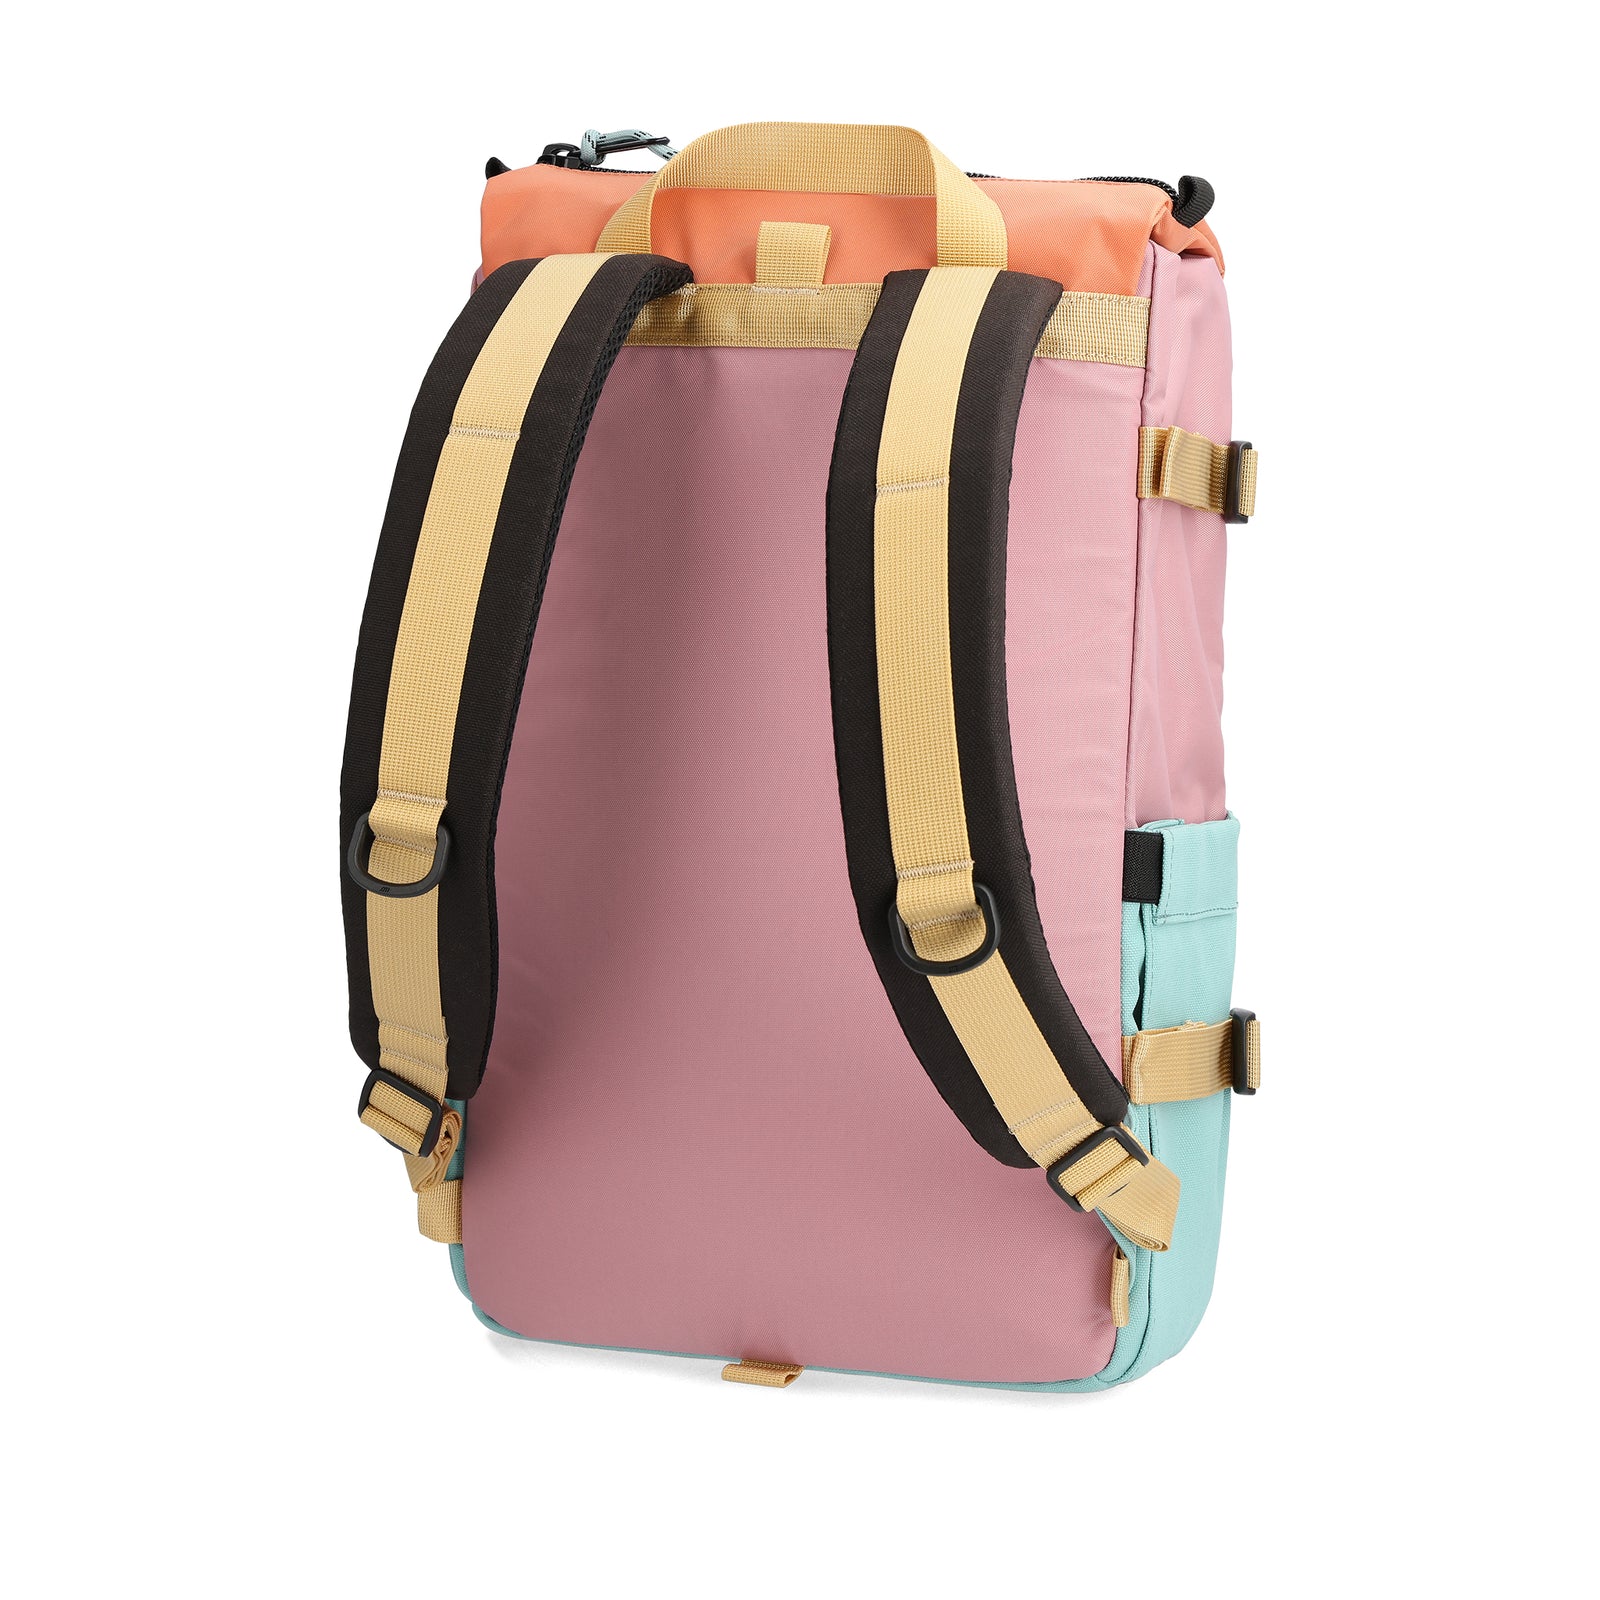 Back View of Topo Designs Rover Pack Classic in "Rose / Geode Green"